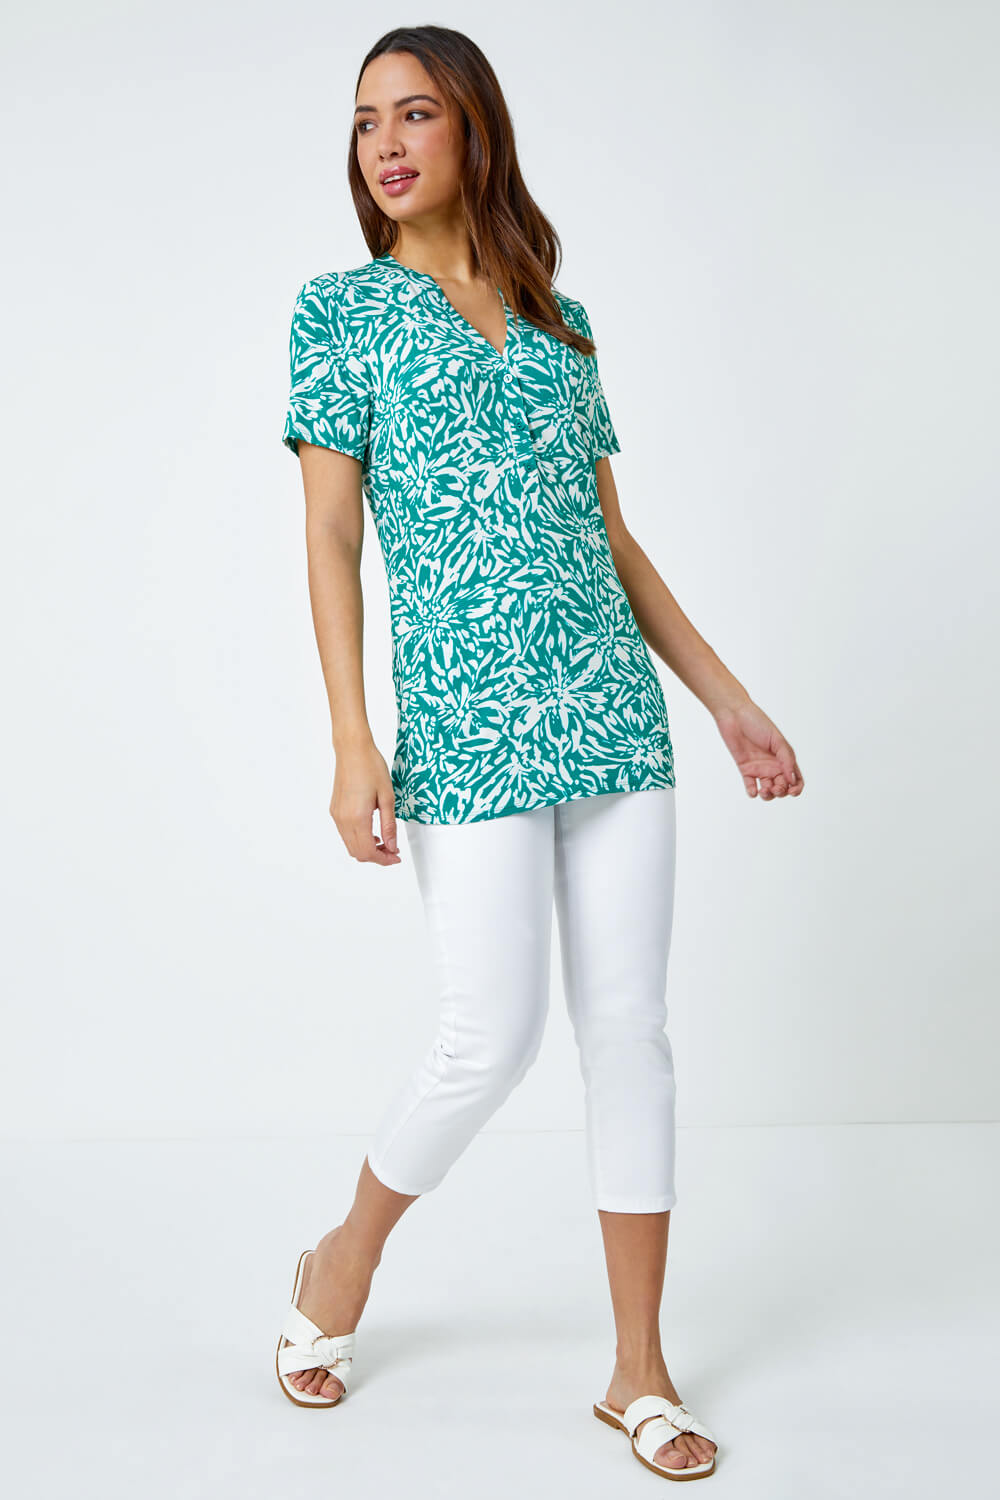 Green Abstract Floral Print Top, Image 4 of 5